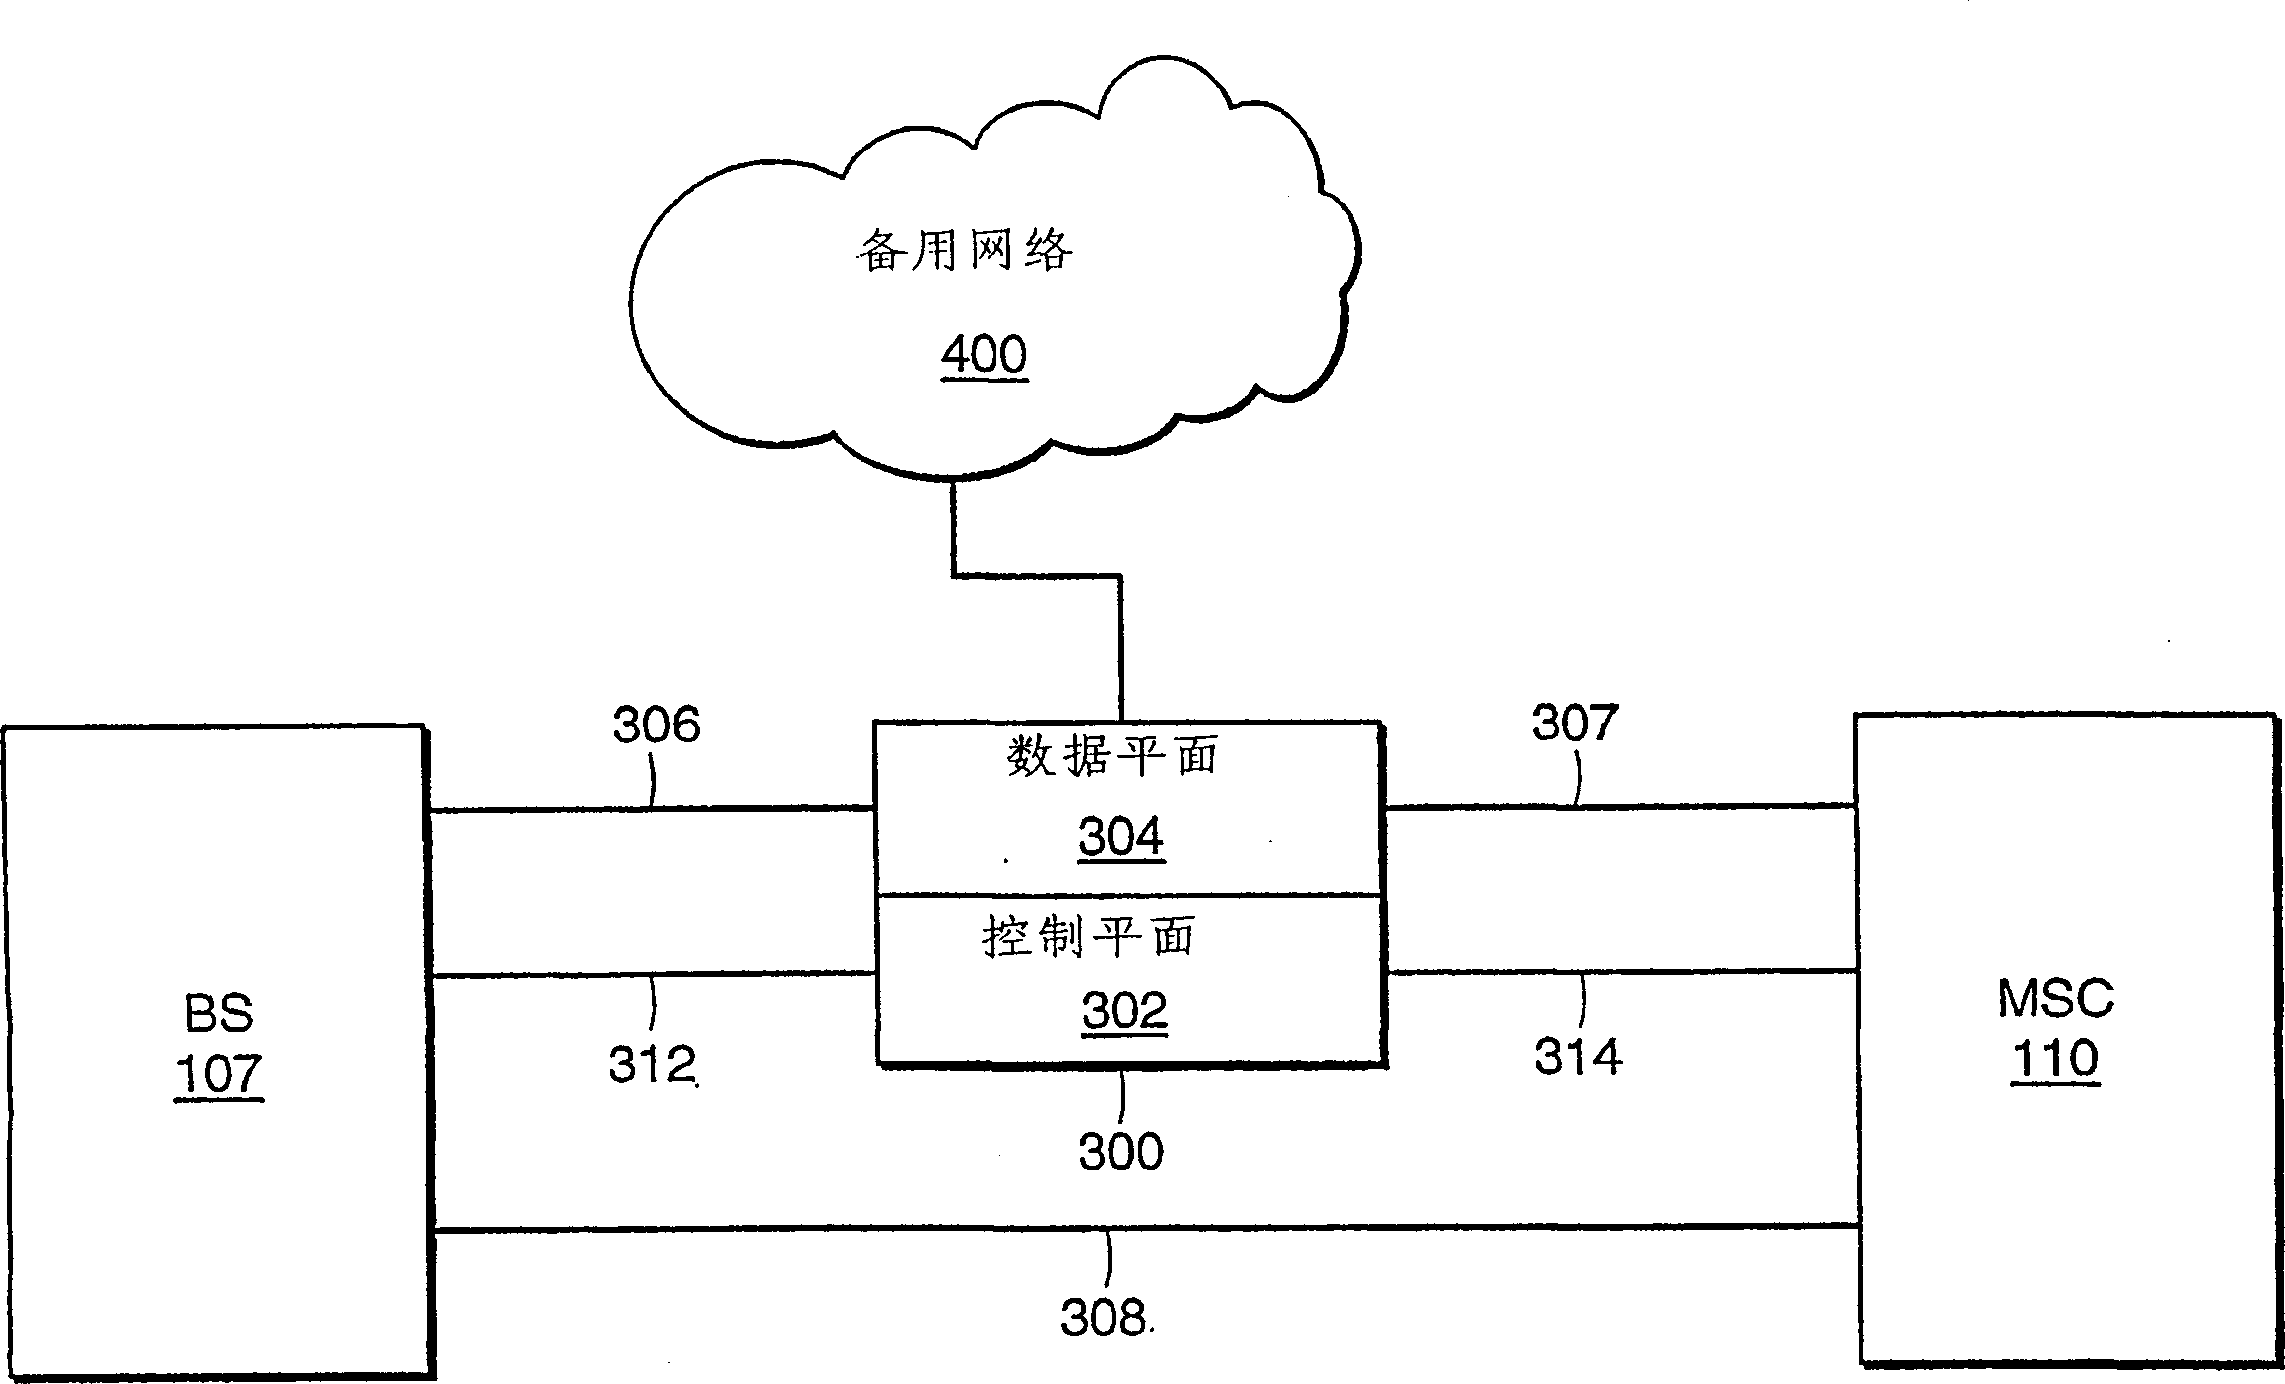 System and method of preserving point codes in a mobile network having a proxy switch